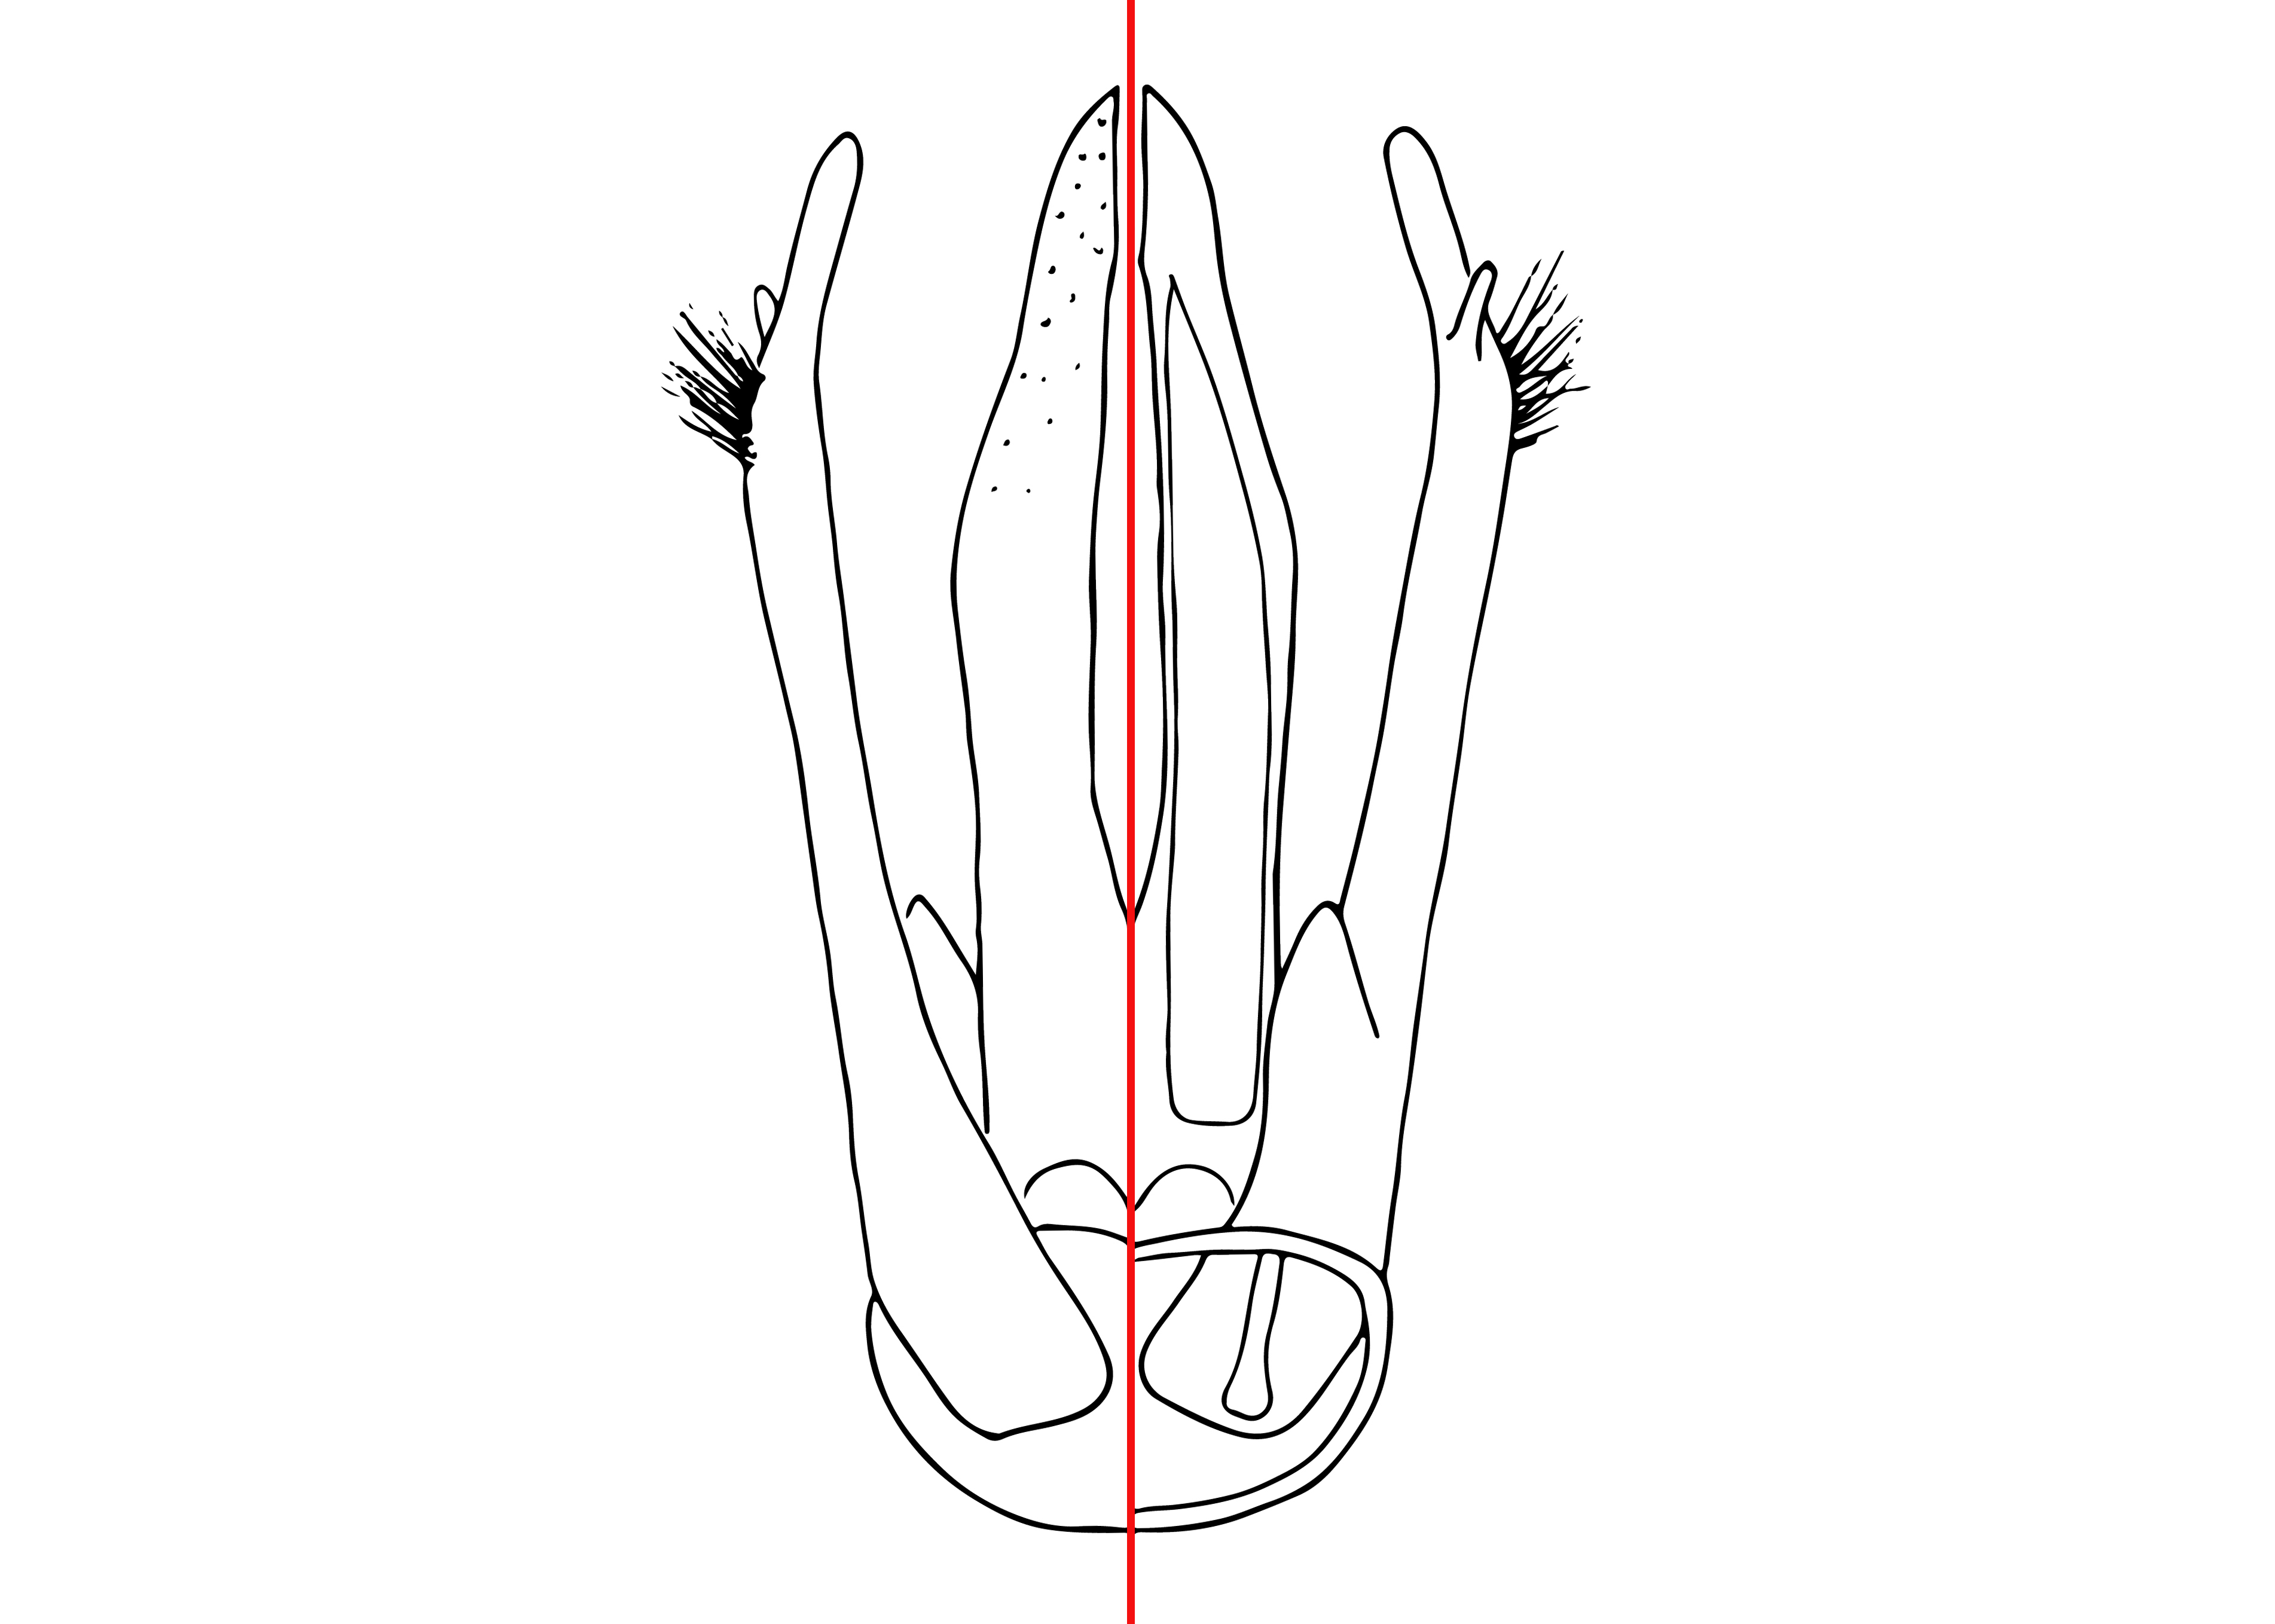   Osmia lignaria  male, diagram showing the genitalia with the dorsal view on the left side and the ventral view on the right, diagram modified from Rust 1974 
